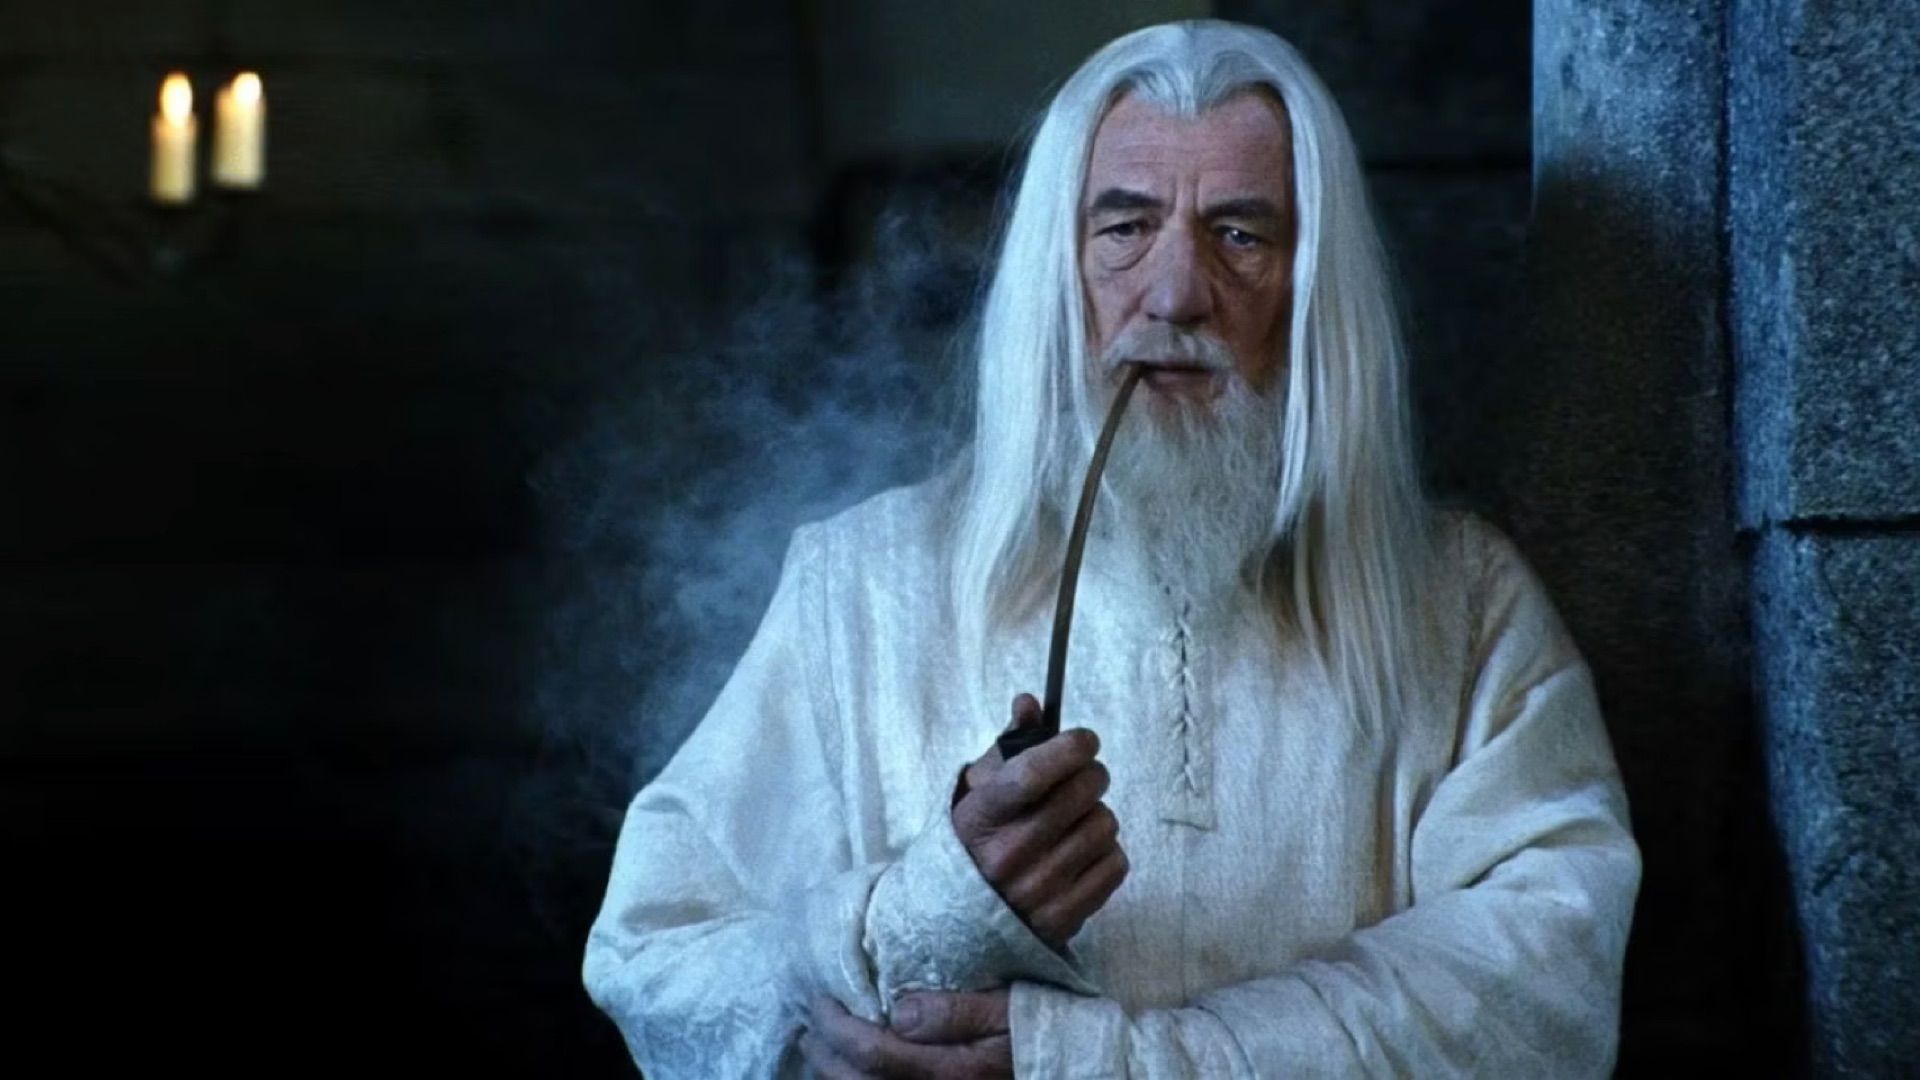 Why Doesn’t Gandalf Use Magic More Often in Lord of the Rings?